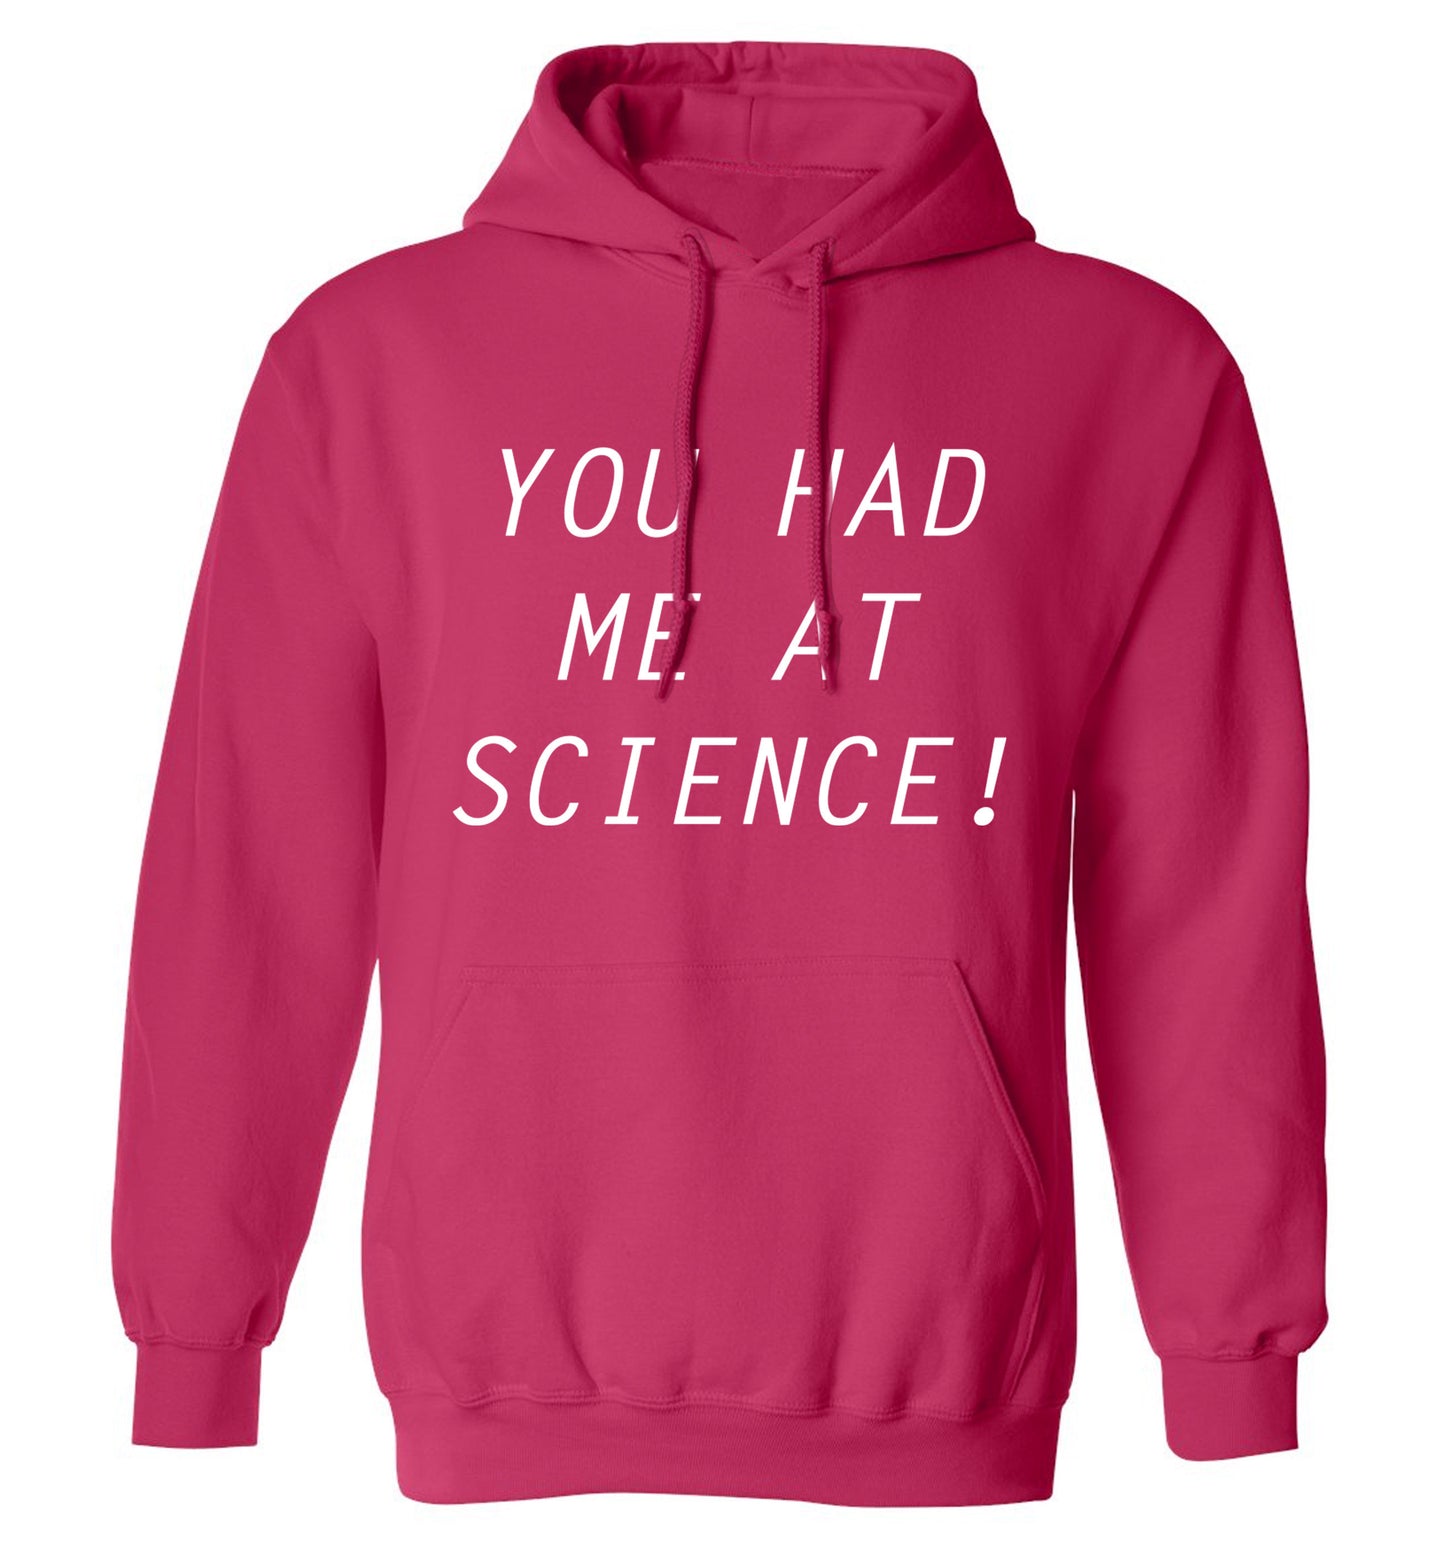 You had me at science adults unisex pink hoodie 2XL